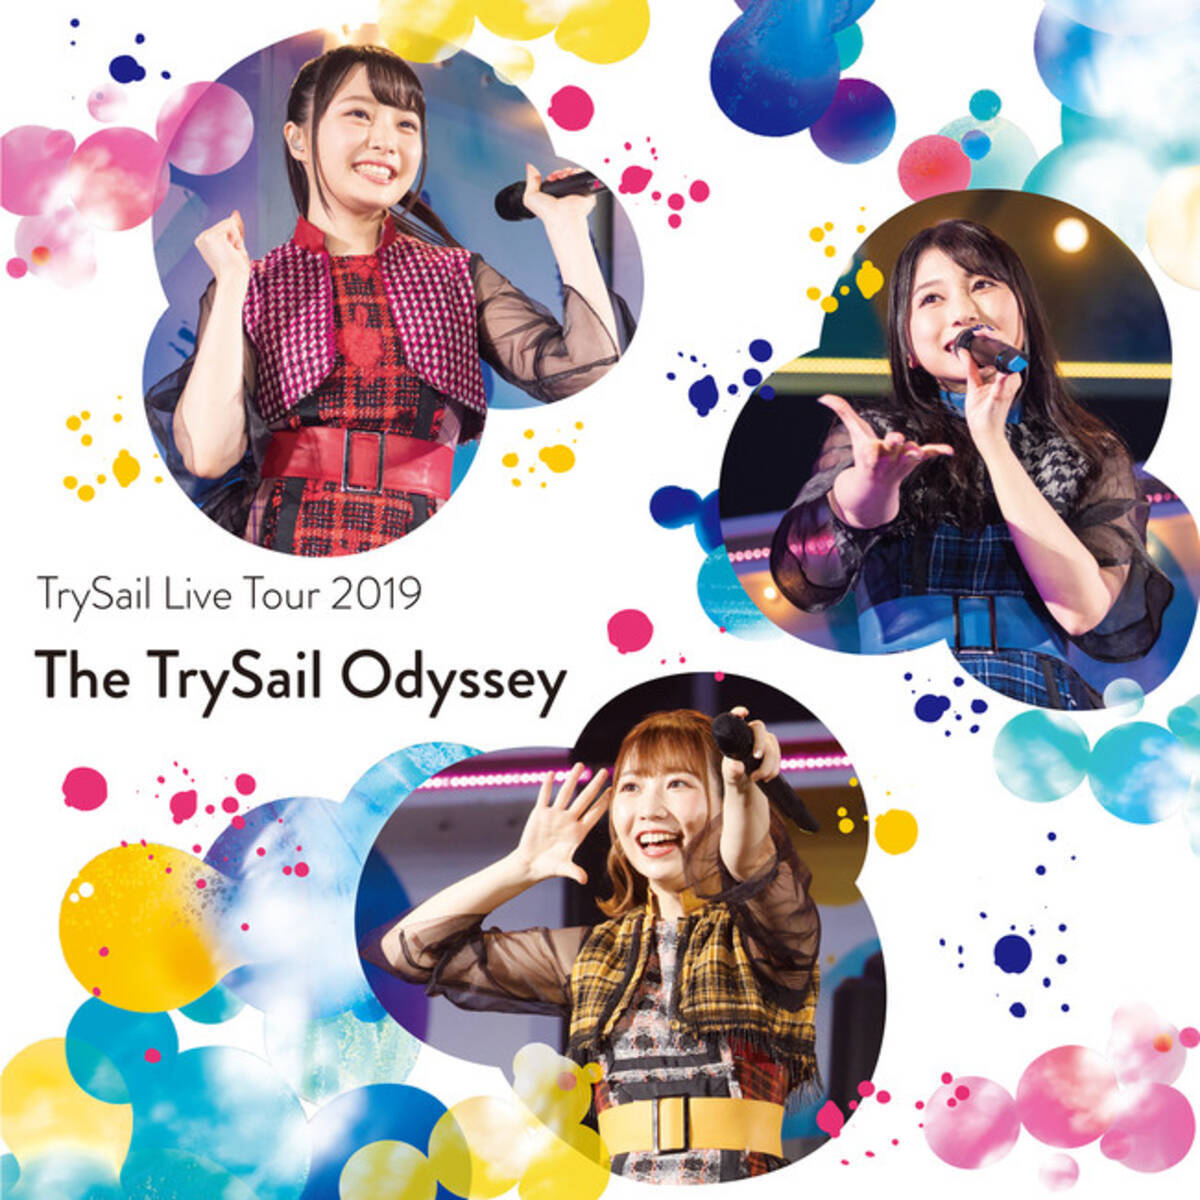 Trysail 自身最大規模のライブツアー Trysail Live Tour 19 The Trysail Odyssey の音源を一斉配信 年8月26日 エキサイトニュース 3 3